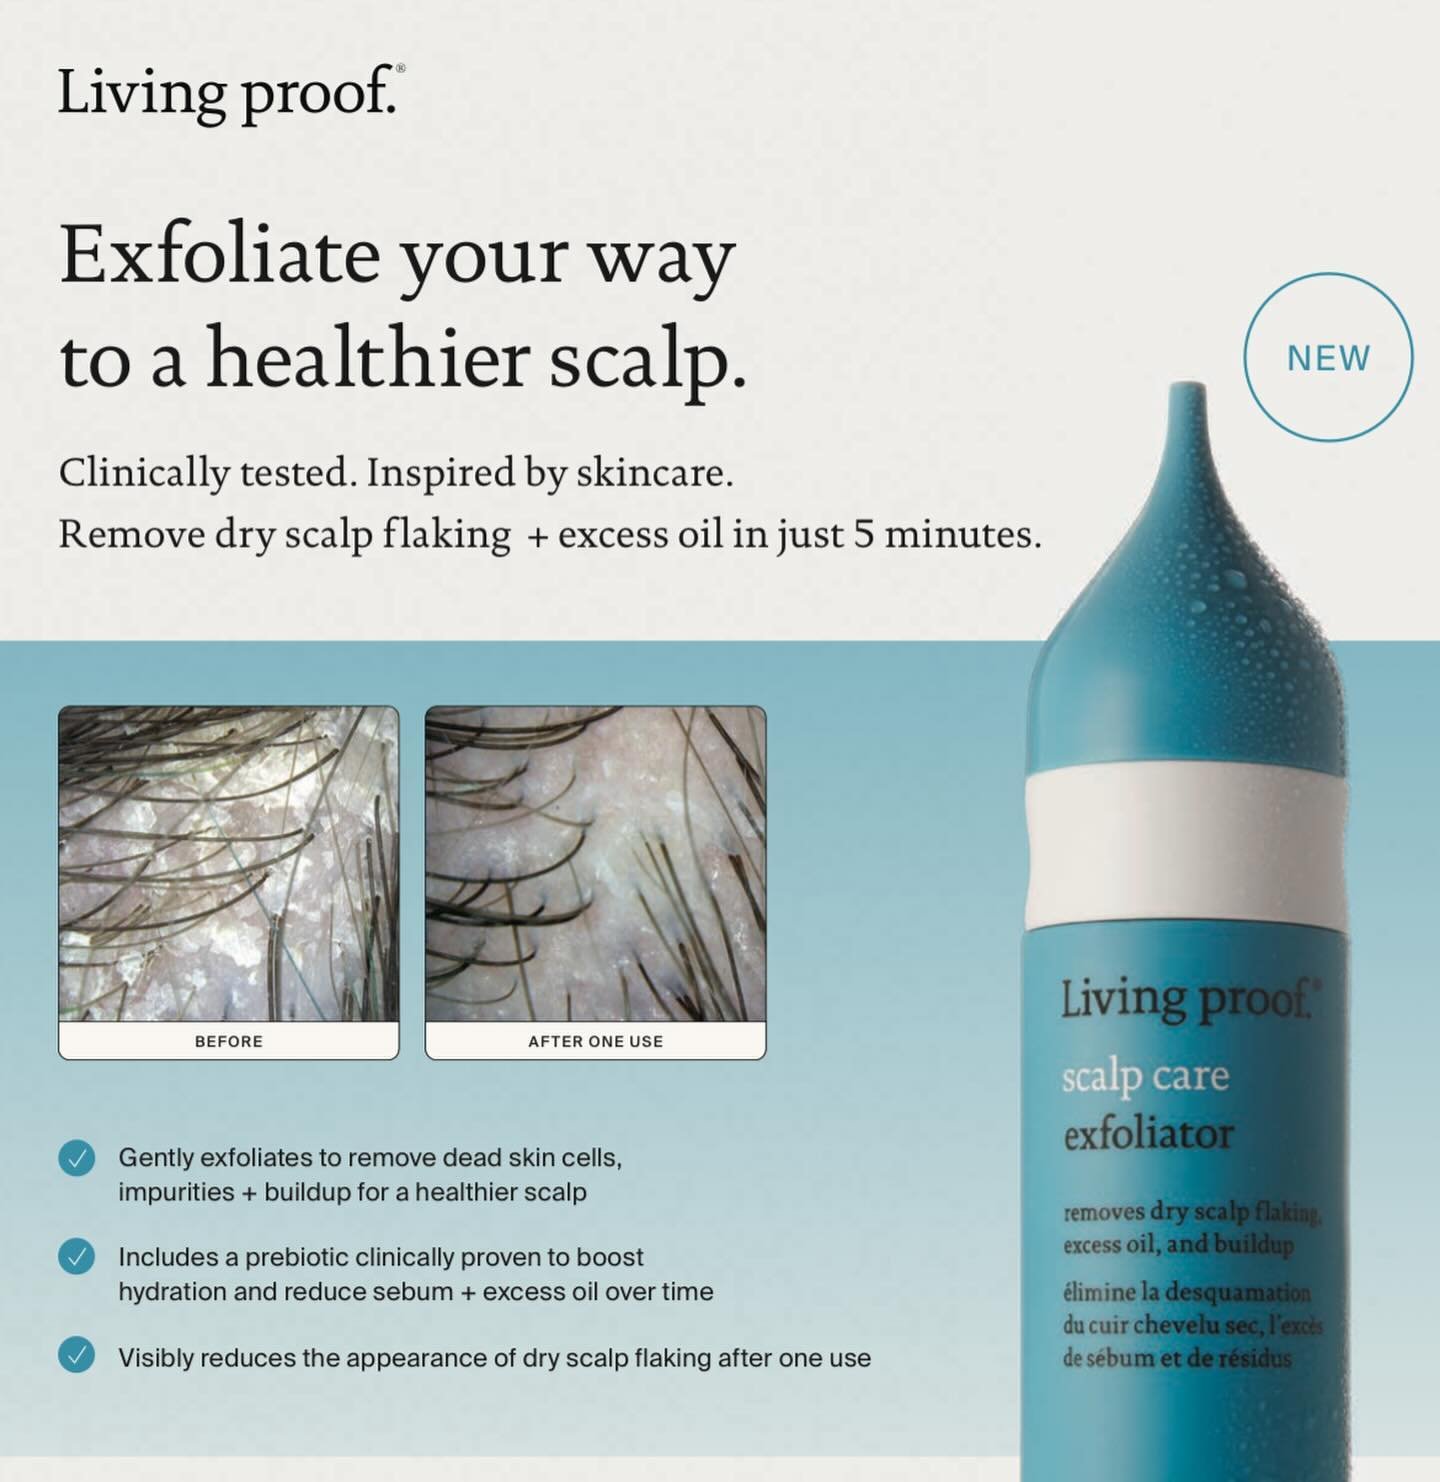 Exfoliate your way to a healthy scalp, with the ✨NEW ✨ @livingproofinc scalp care exfoliator 😍 

Now in stock at Beauty Craft! 

Swipe ➡️ for product details 🩵

*Living Proof is available at Beauty Craft in the states of IA, KS, MN, MO, NE, ND, SD 